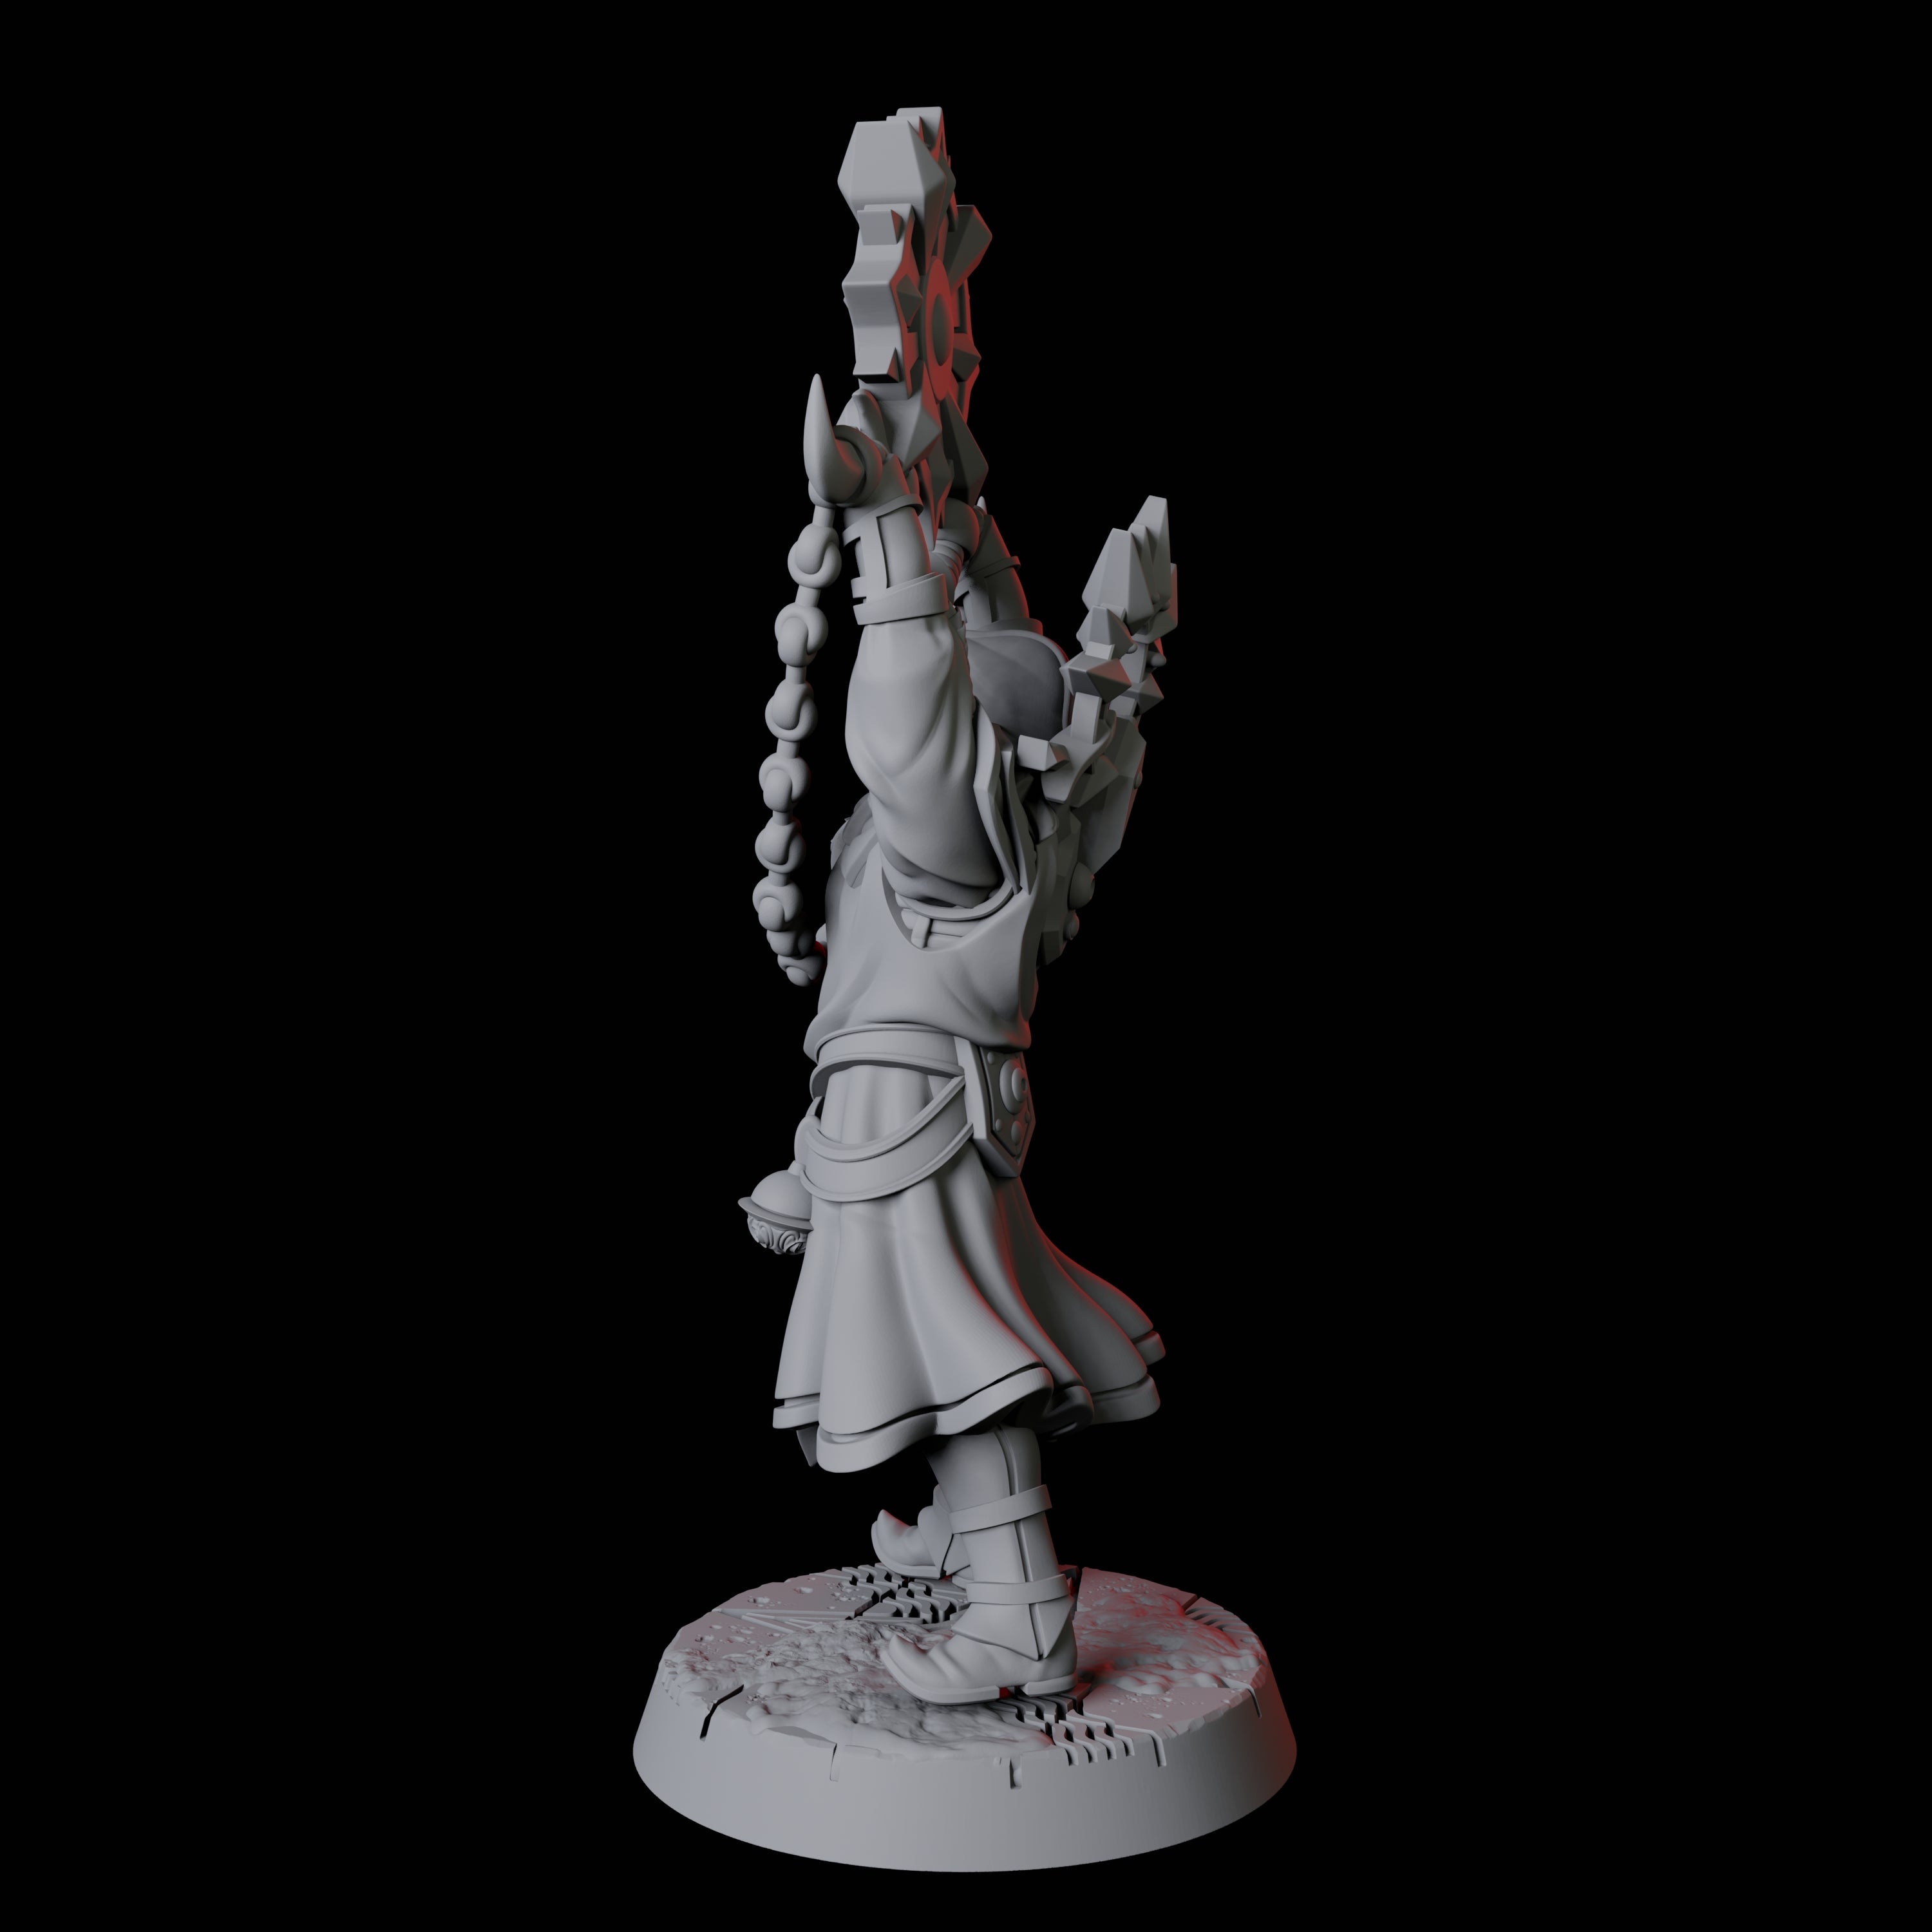 Sun Worshipping Cultist A Miniature for Dungeons and Dragons, Pathfinder or other TTRPGs